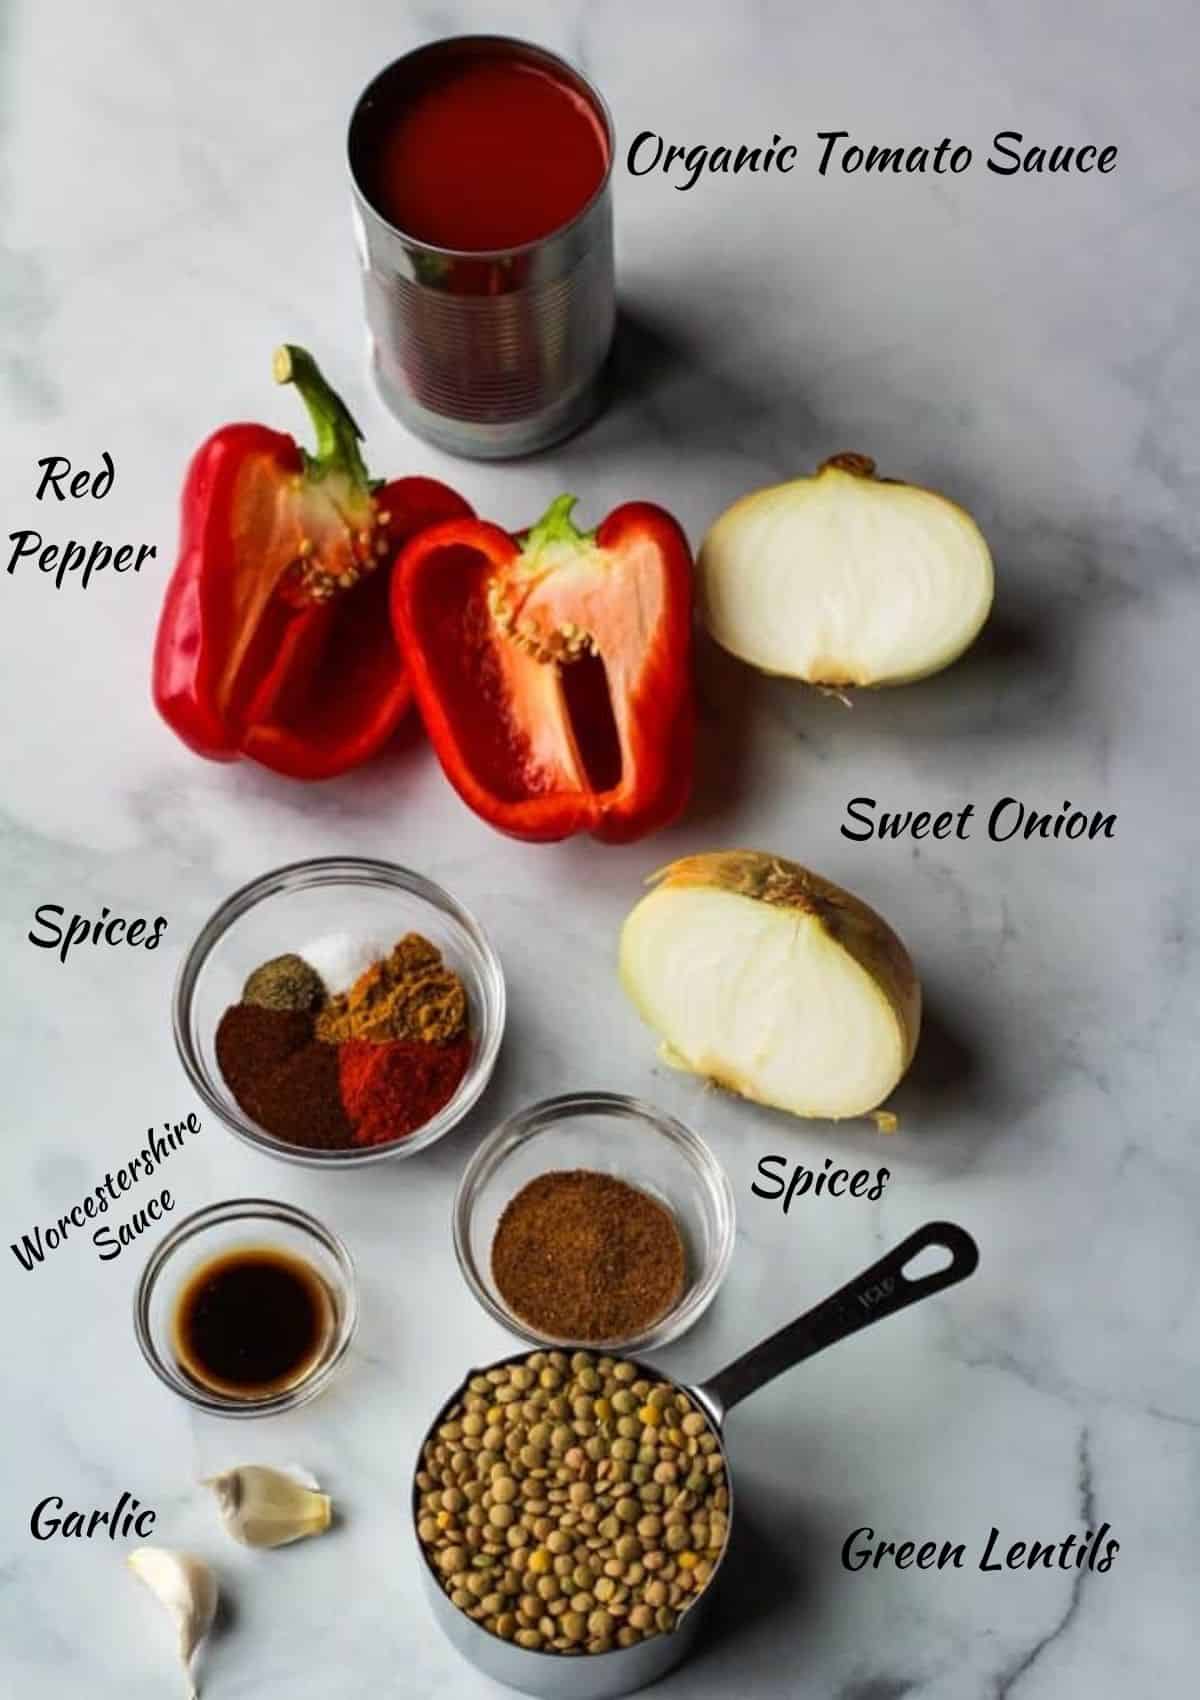 Ingredients needed for vegan sloppy joes, tomato sauce, red pepper, onion, spices, lentils, garlic.